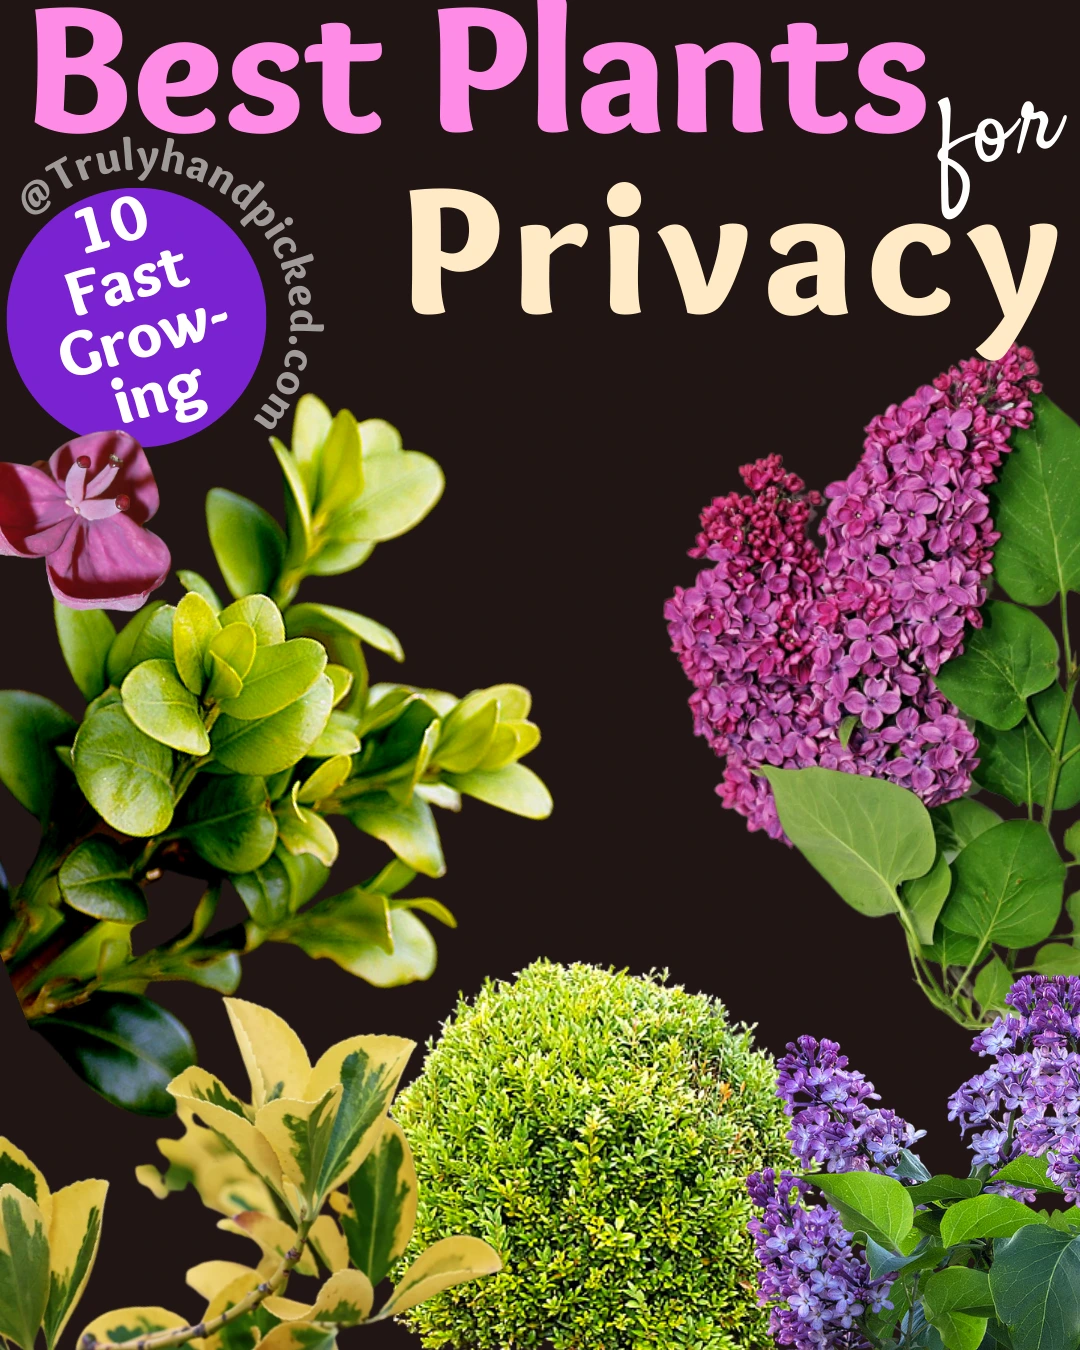 Fast Growing Privacy Plants and Trees for Your Yard